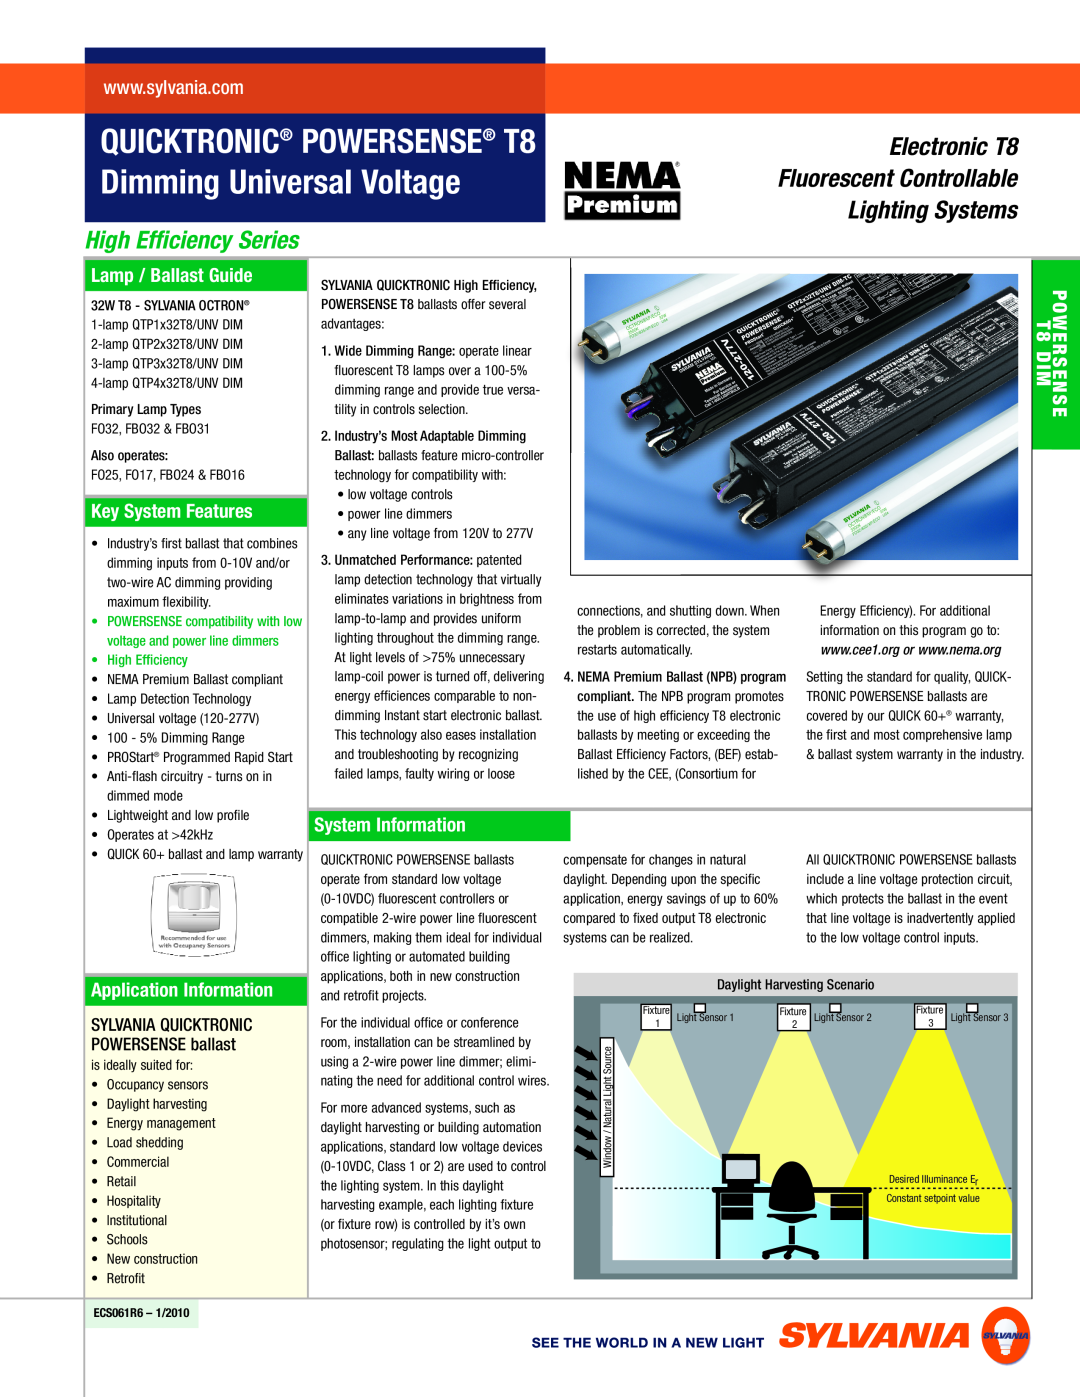 Sylvania warranty Lamp / Ballast Guide, Key System Features, System Information, Application Information, Electronic T8 